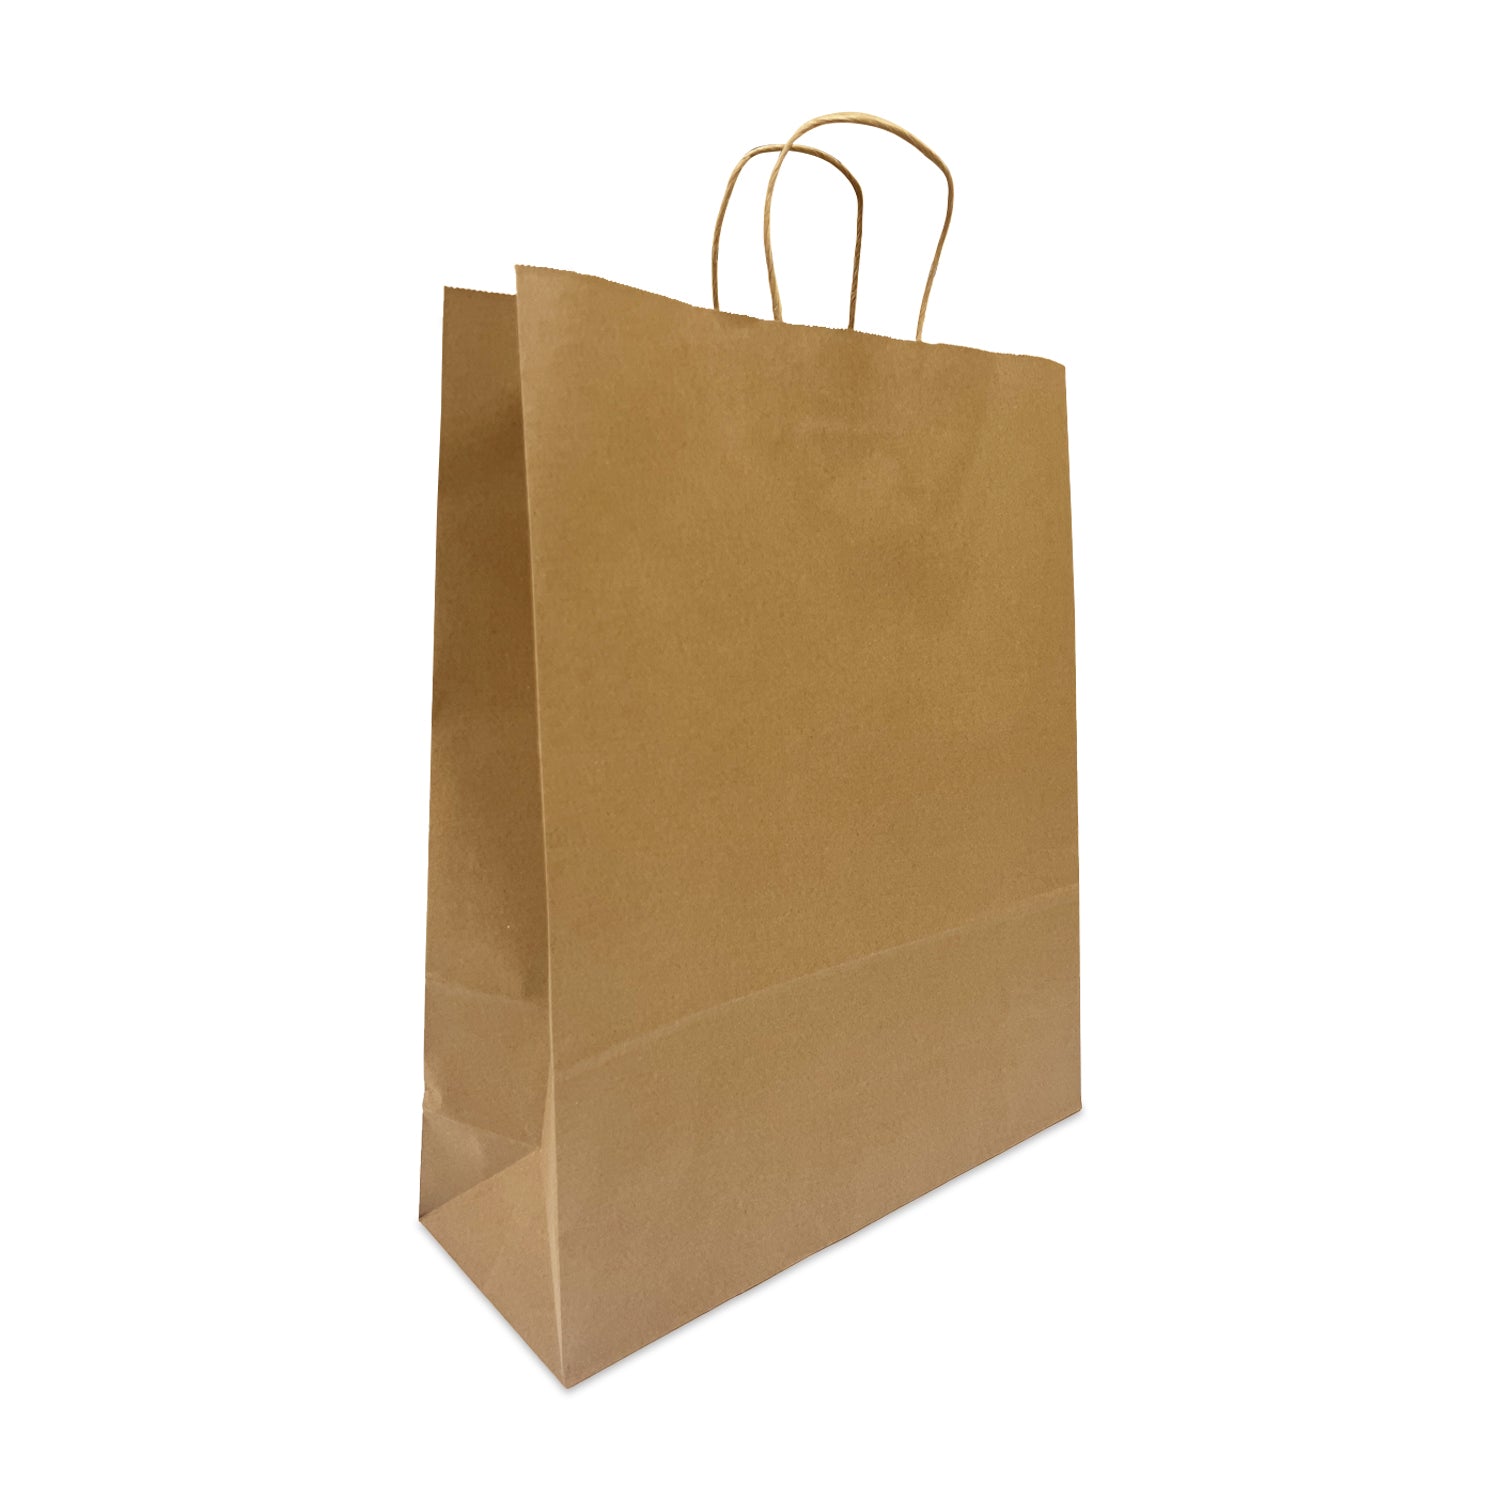 200 Pcs, Queen,  16x6x19.25 inches, Kraft Paper Bags, with Twisted Handle